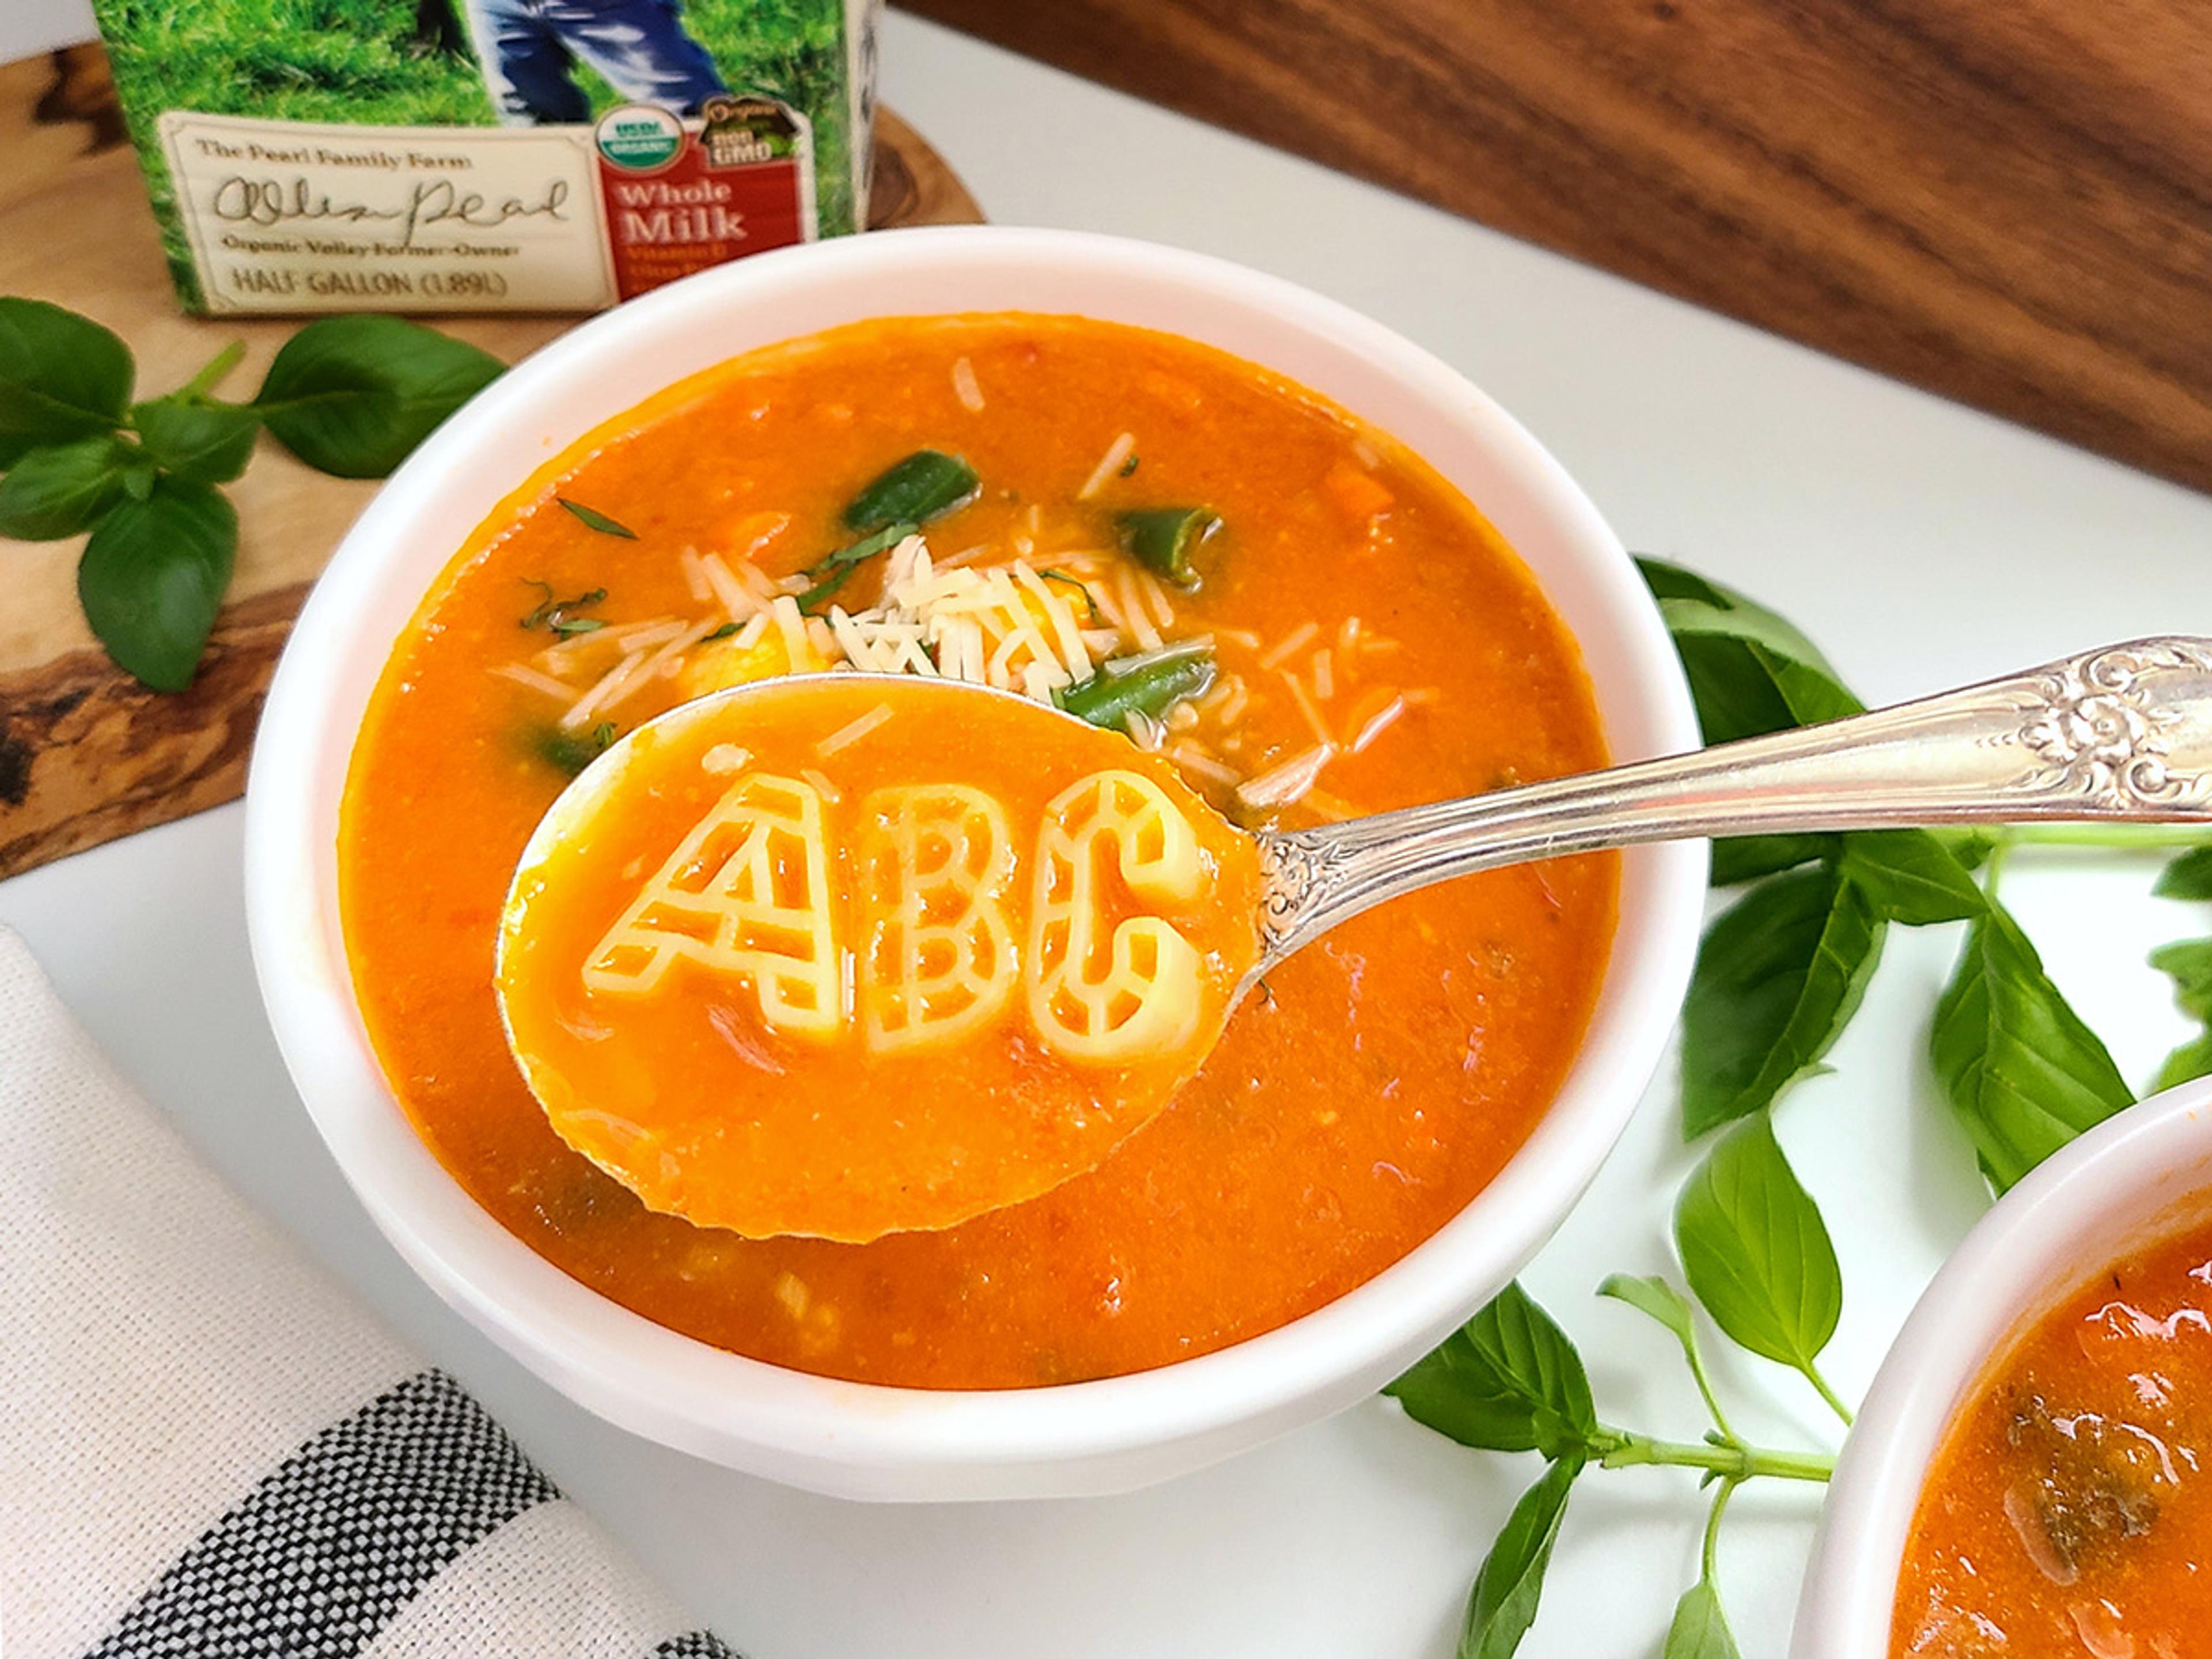 A spoon holds A, B, C pasta over a bowl of tomato-based soup sprinkled with shredded cheese.